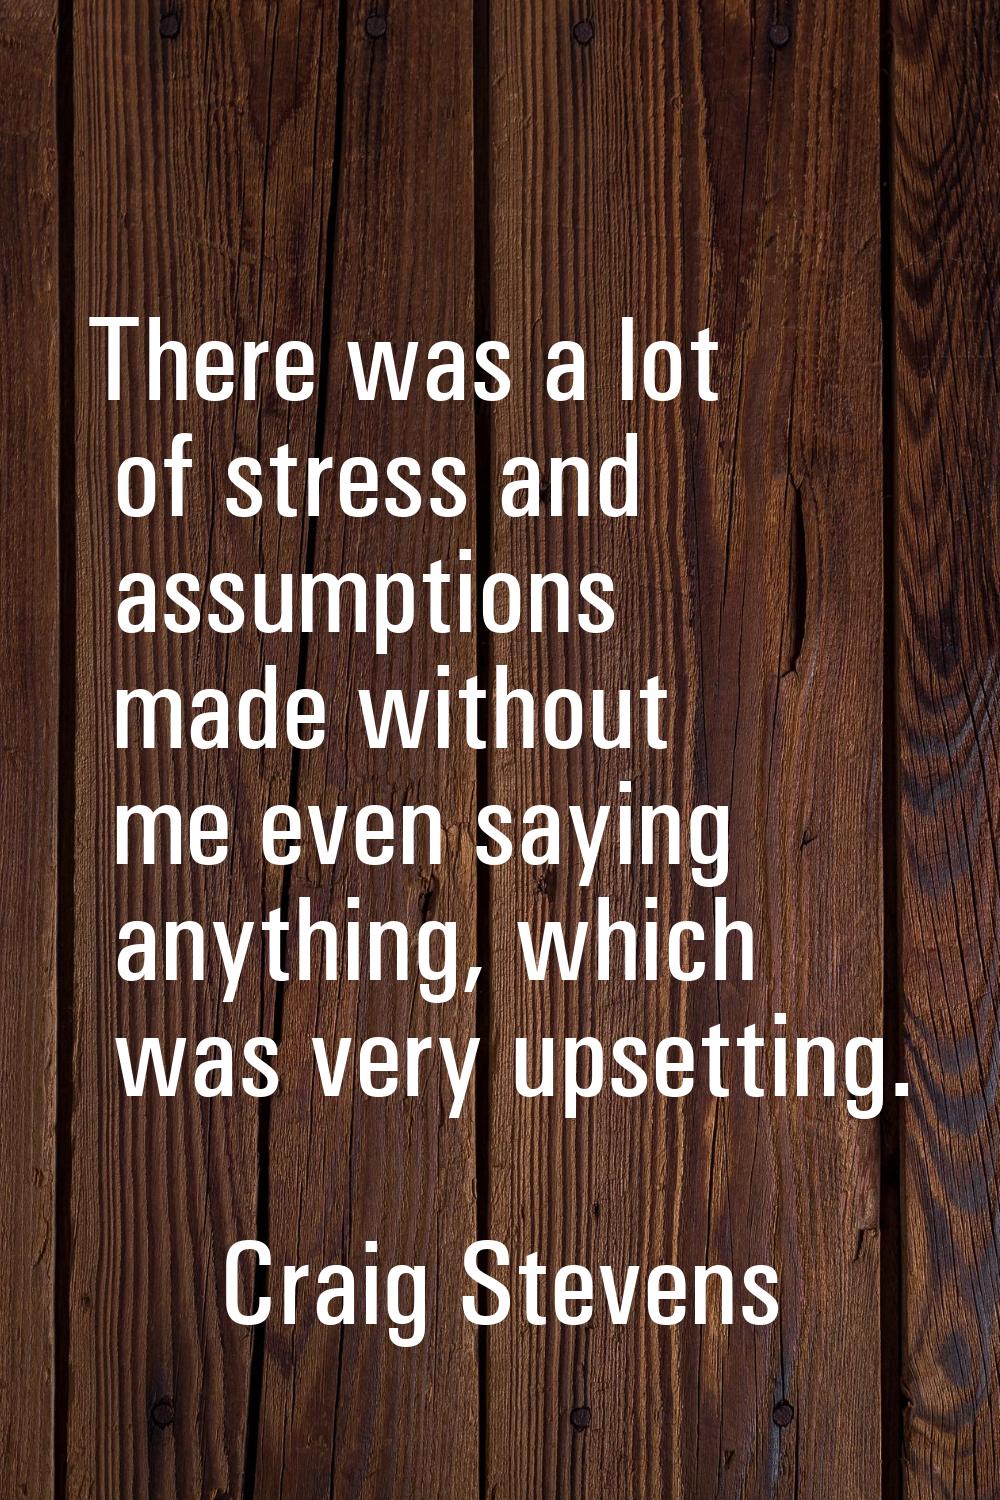 There was a lot of stress and assumptions made without me even saying anything, which was very upse